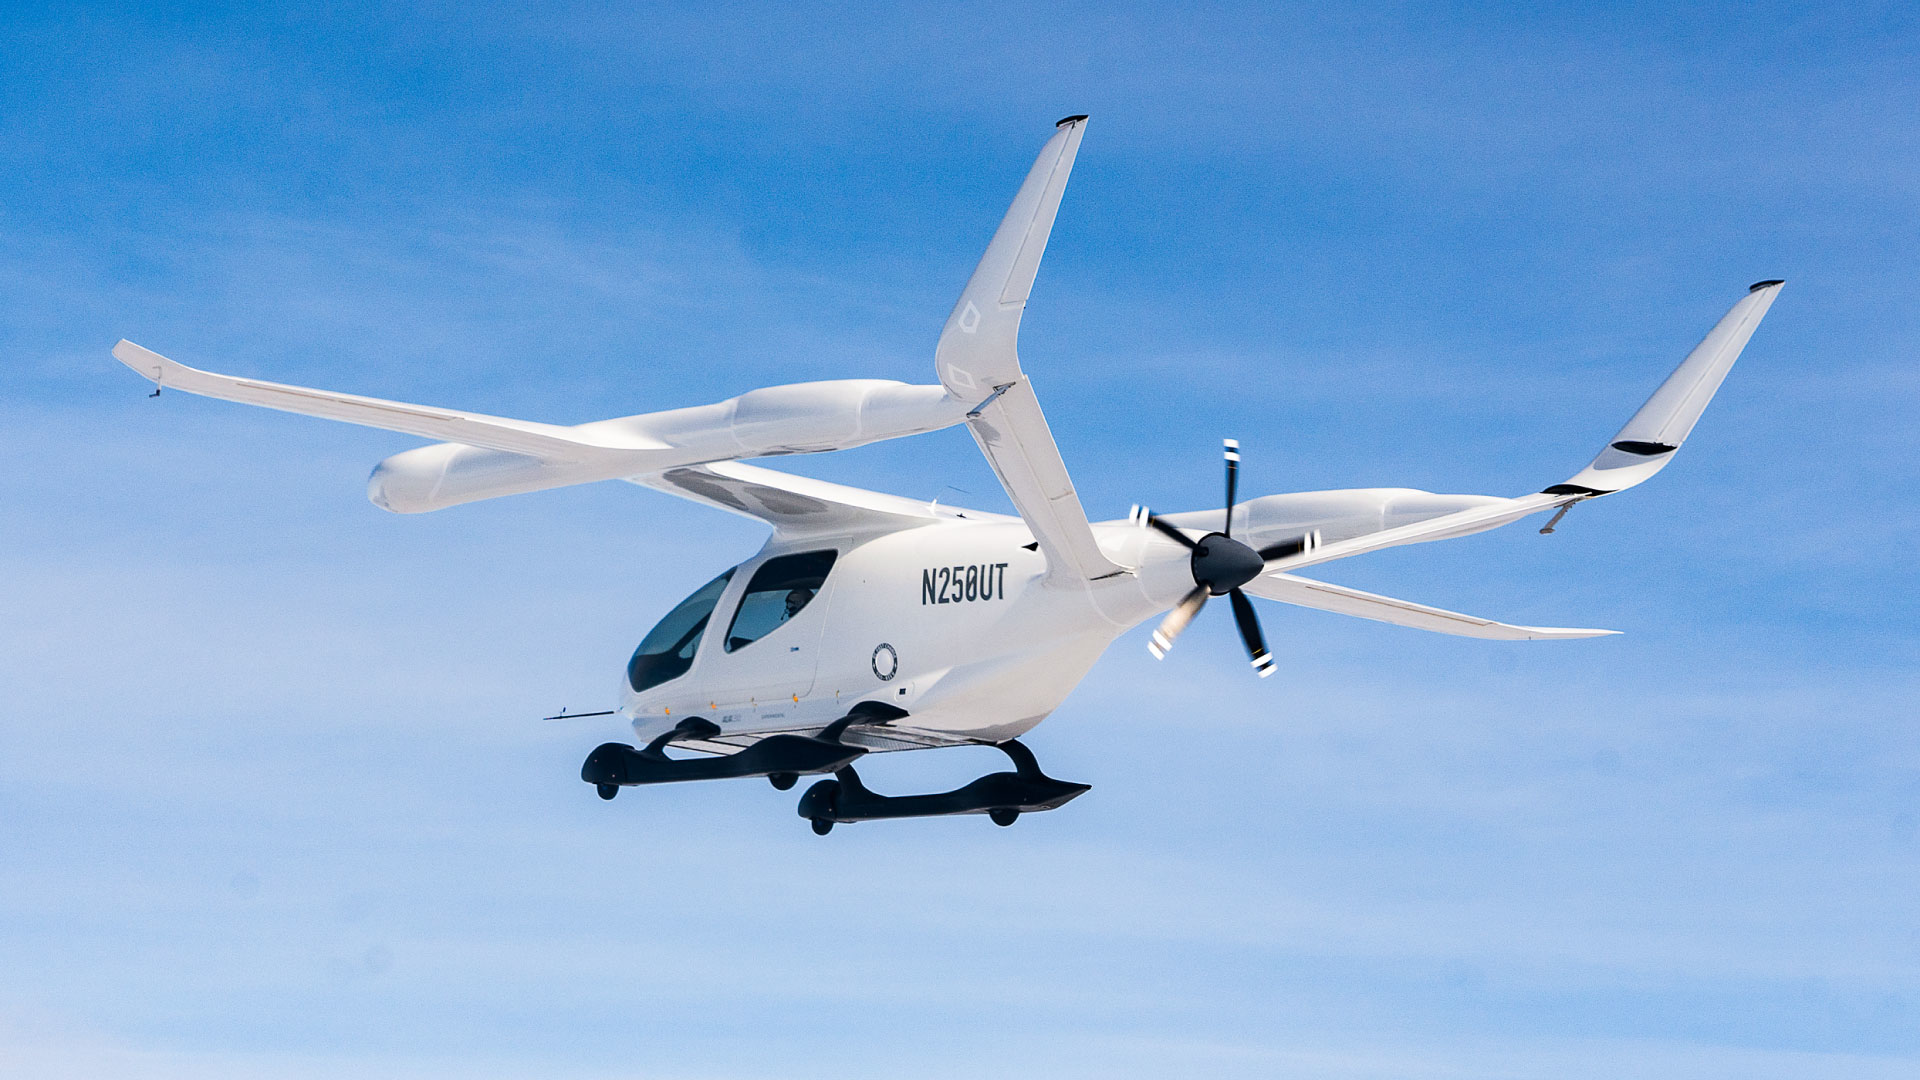 Beta Technologies’ electric aircraft successfully completes cross-border flight